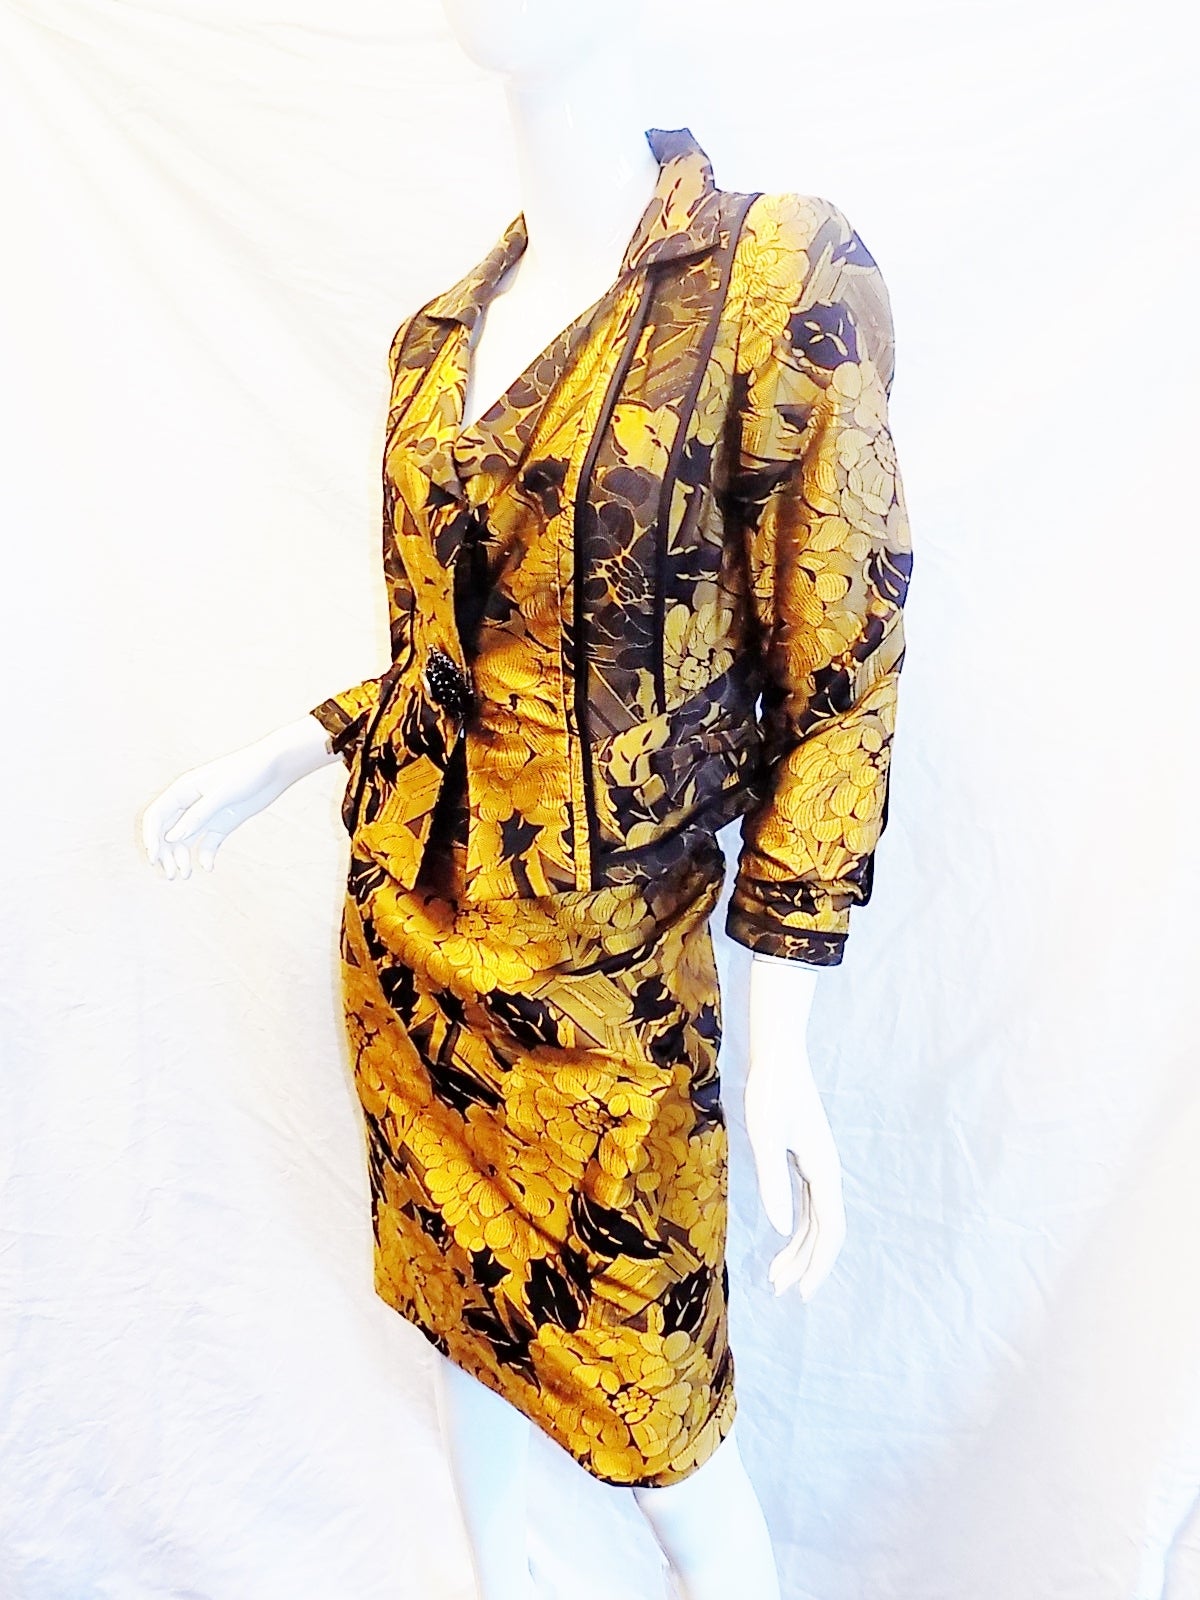 gold and black silk brocade  skirt suit by Christian Lacriox. Incredible detailling from hand stitcing to small bows to the silk printed lining. . Front snap closure with stunning black CZ large hand set pin. Size 42 us 8
Pristine condition like